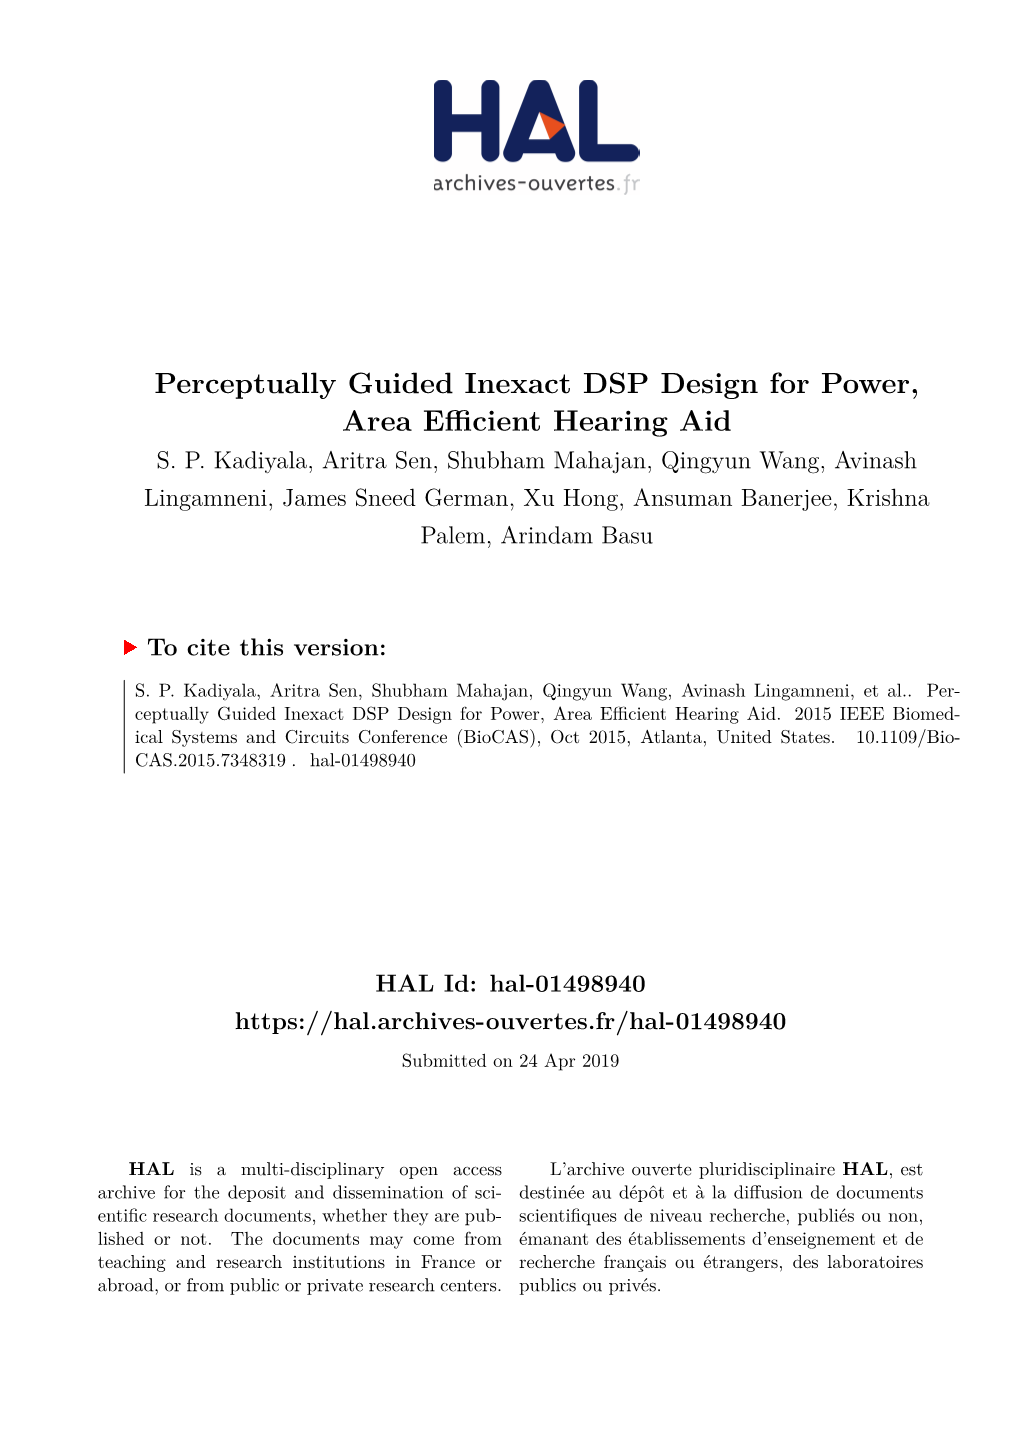 Perceptually Guided Inexact DSP Design for Power, Area Efficient Hearing